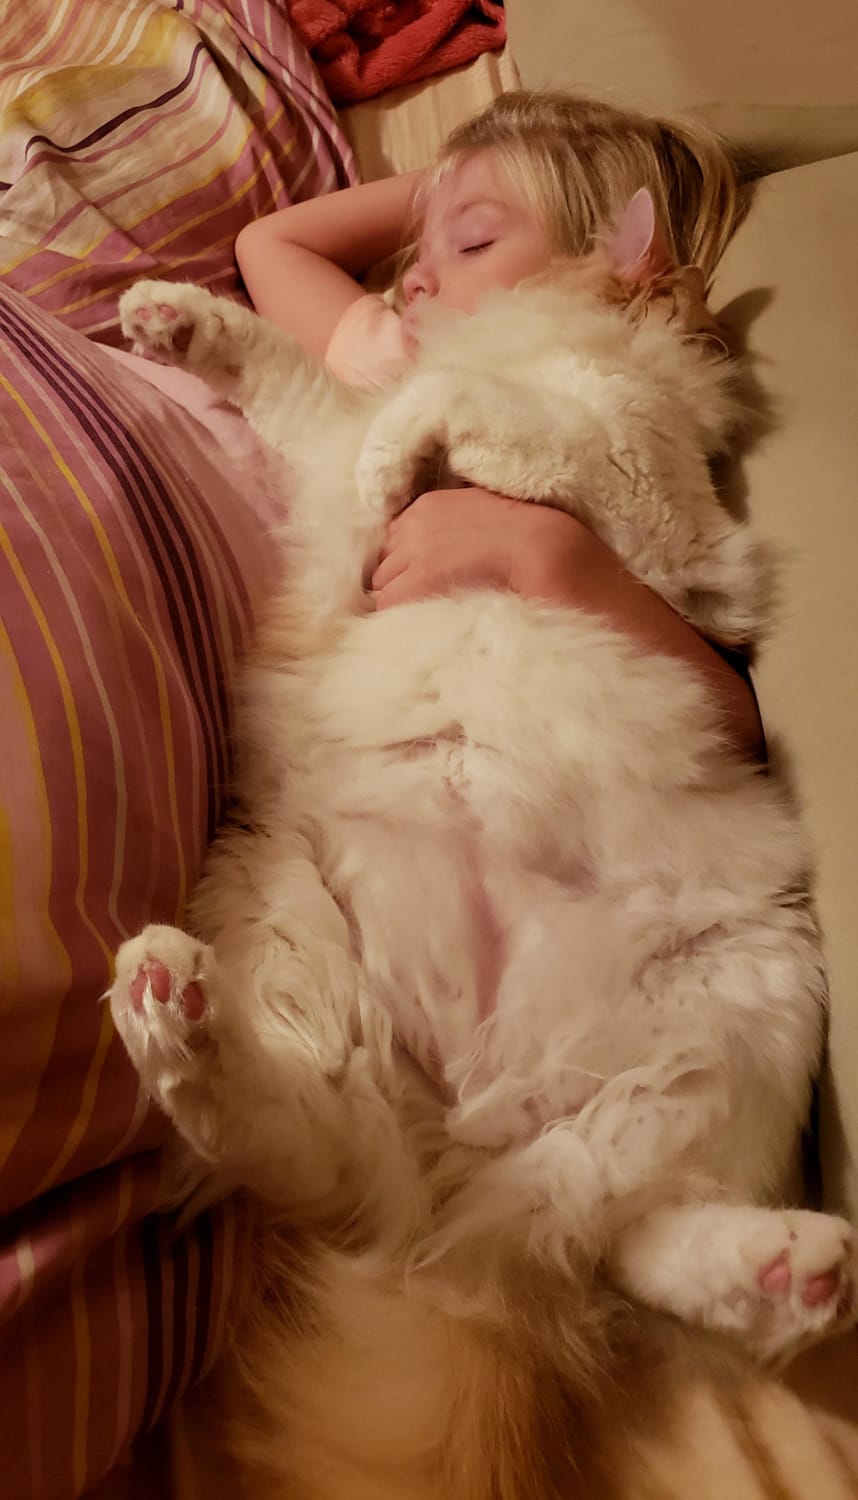 My daughter and floof snuggling.